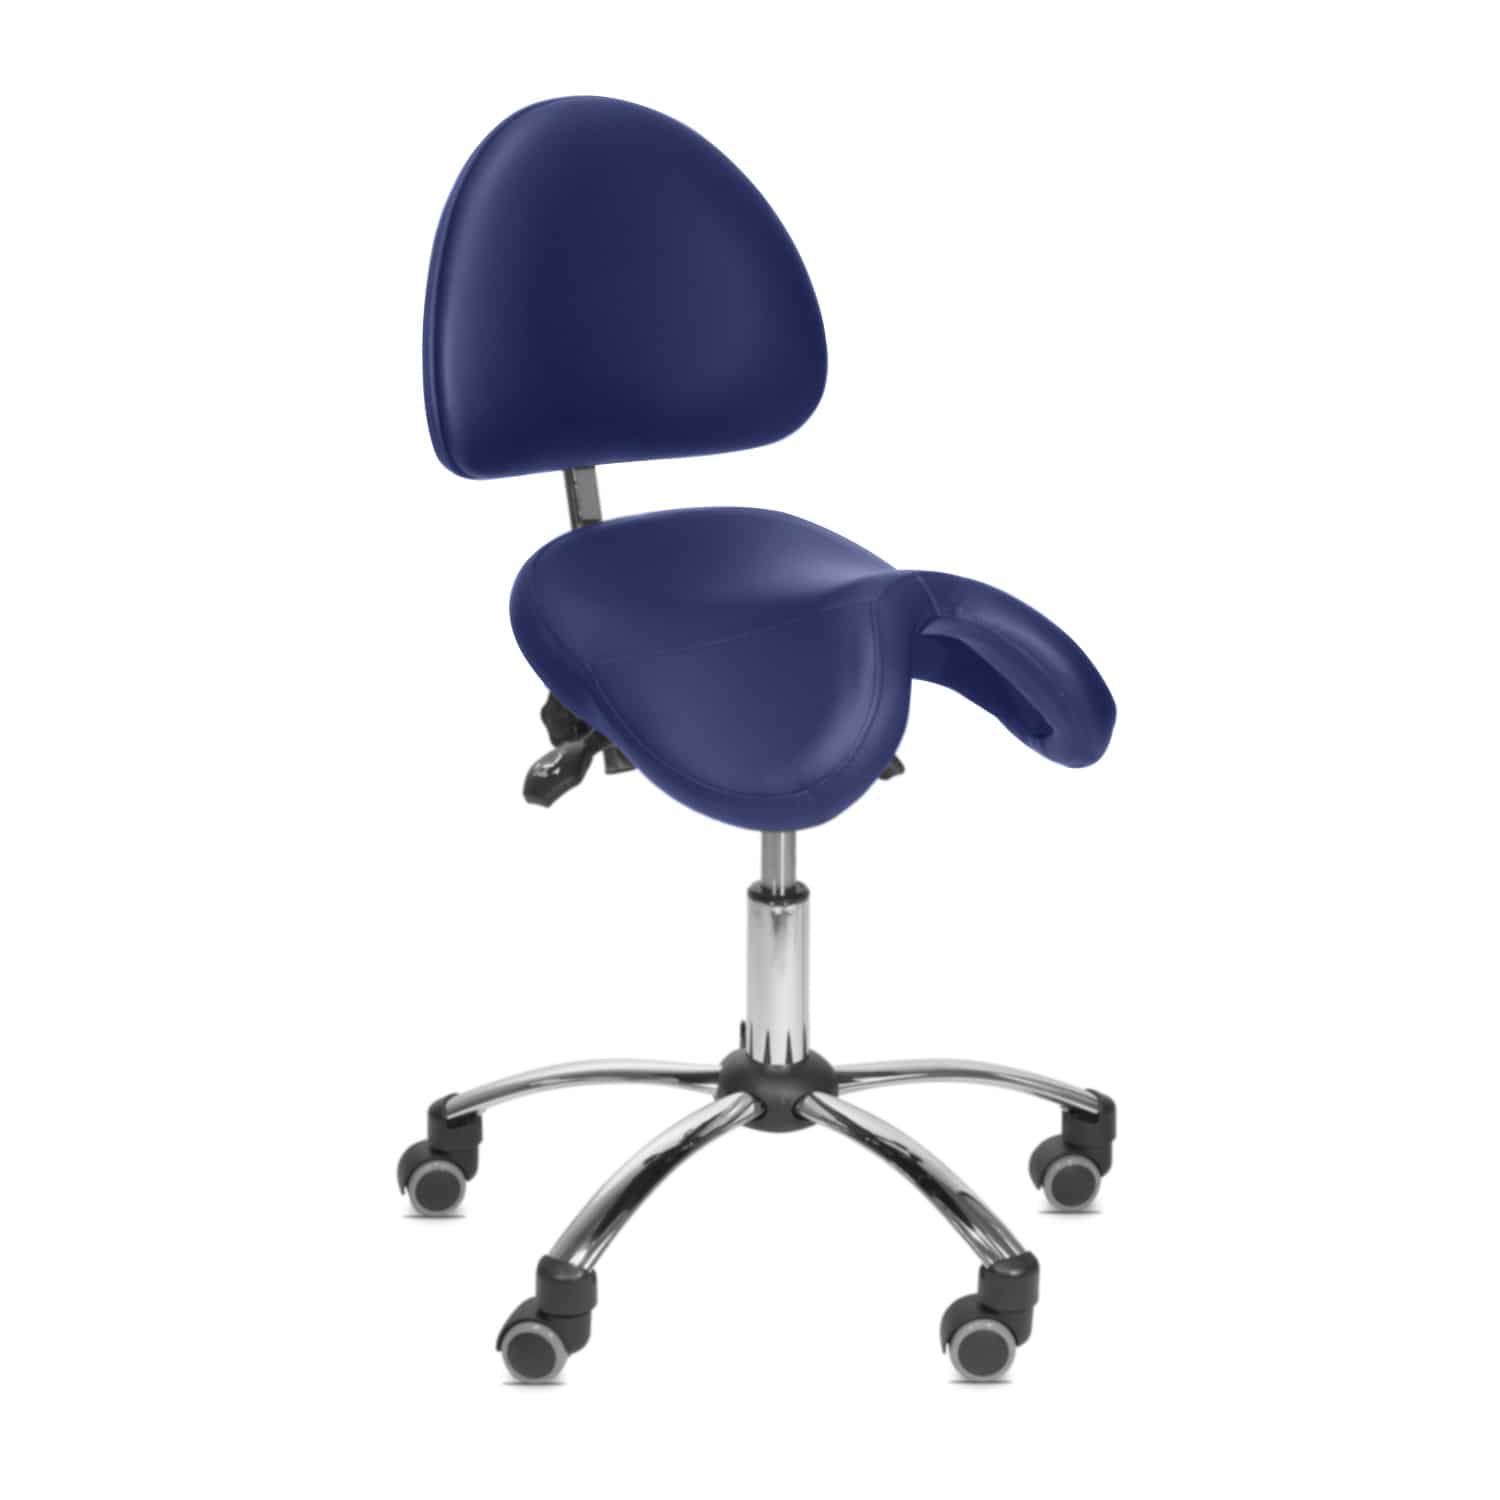 Saddle Stool With Back Support Facilitates Back-Friendly Working